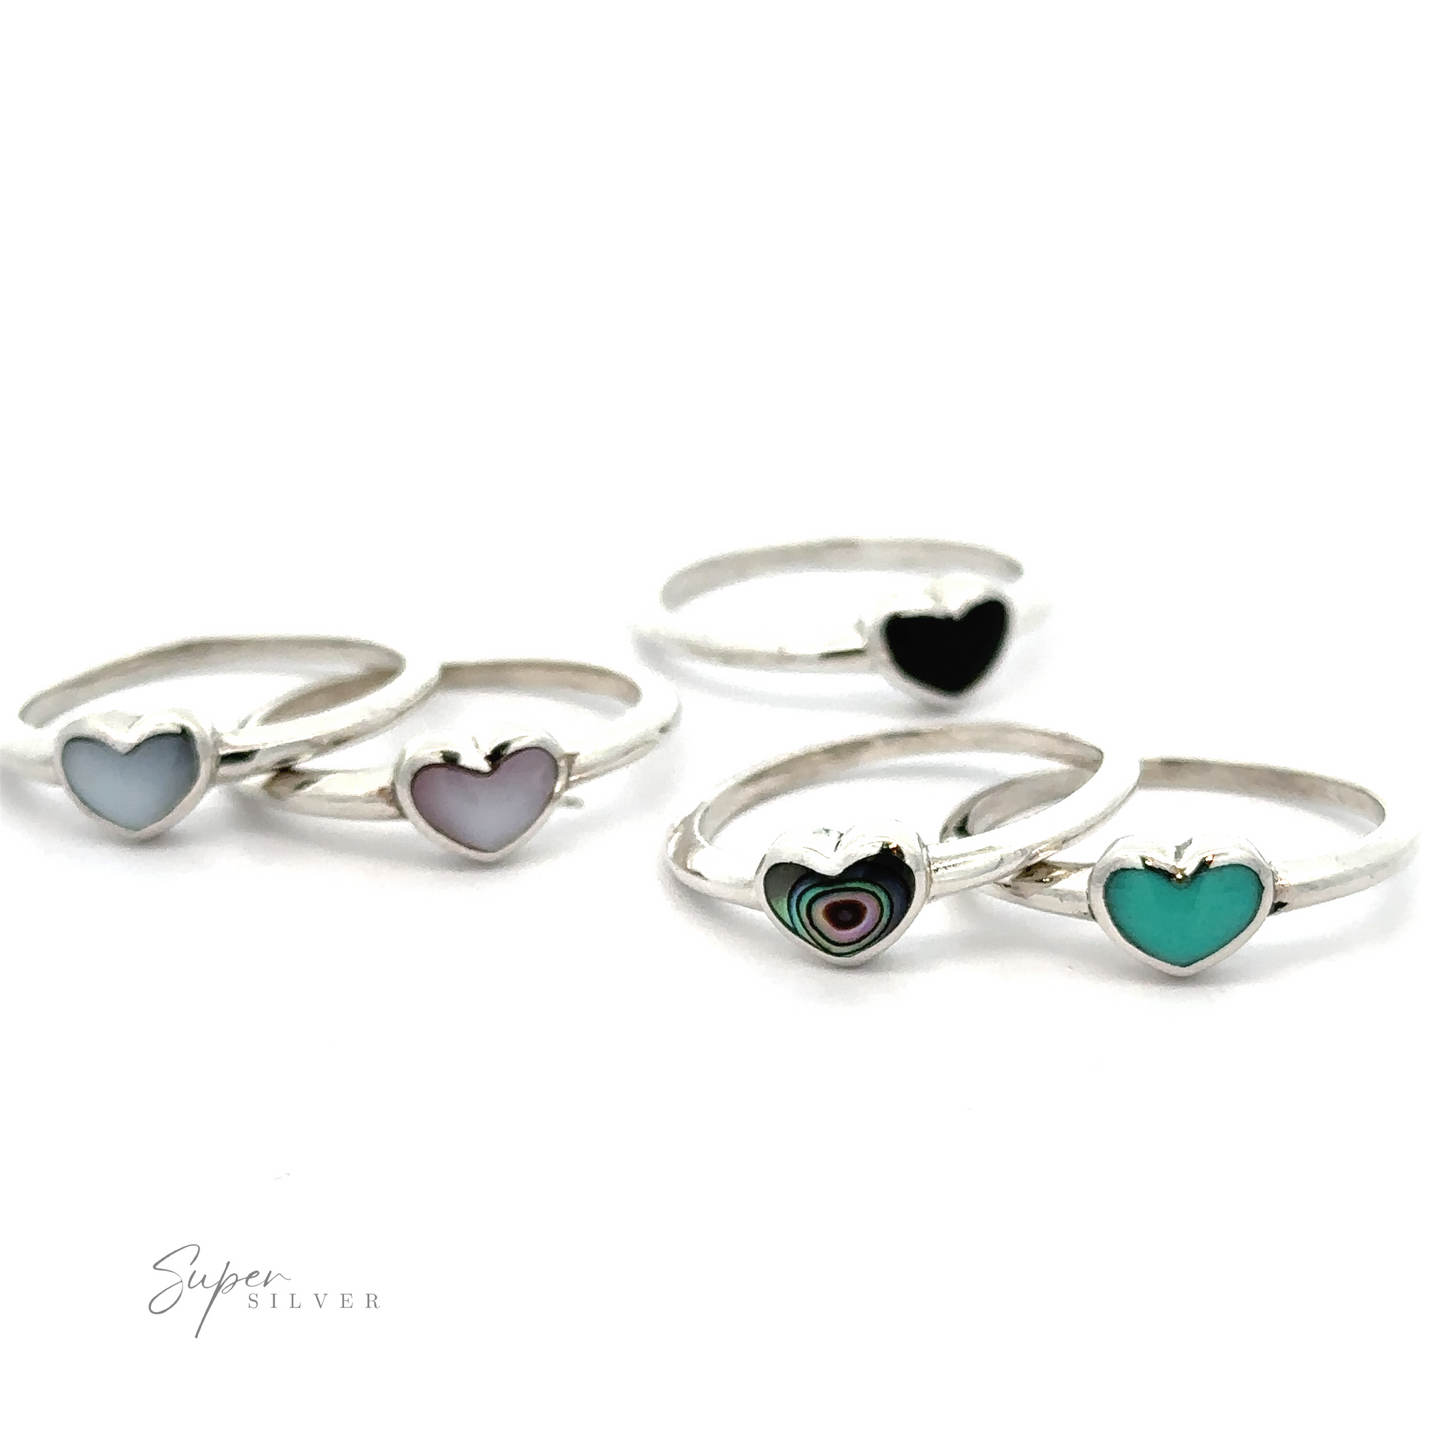 A collection of sterling silver Stone Wire Heart Rings.